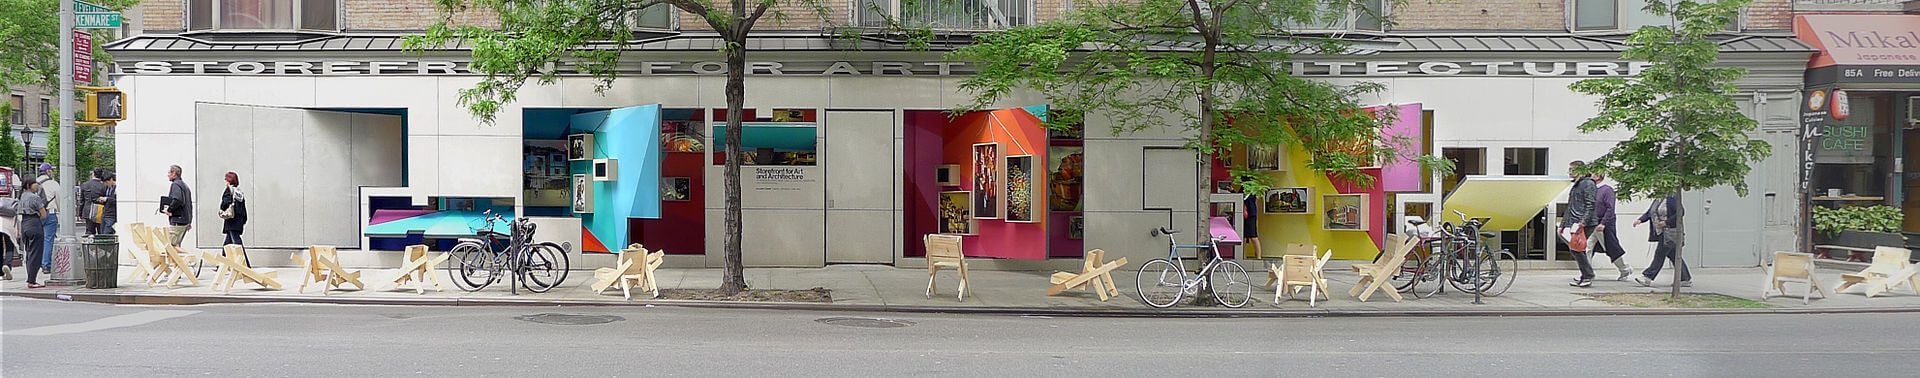 Storefront_for_Art_and_Architecture